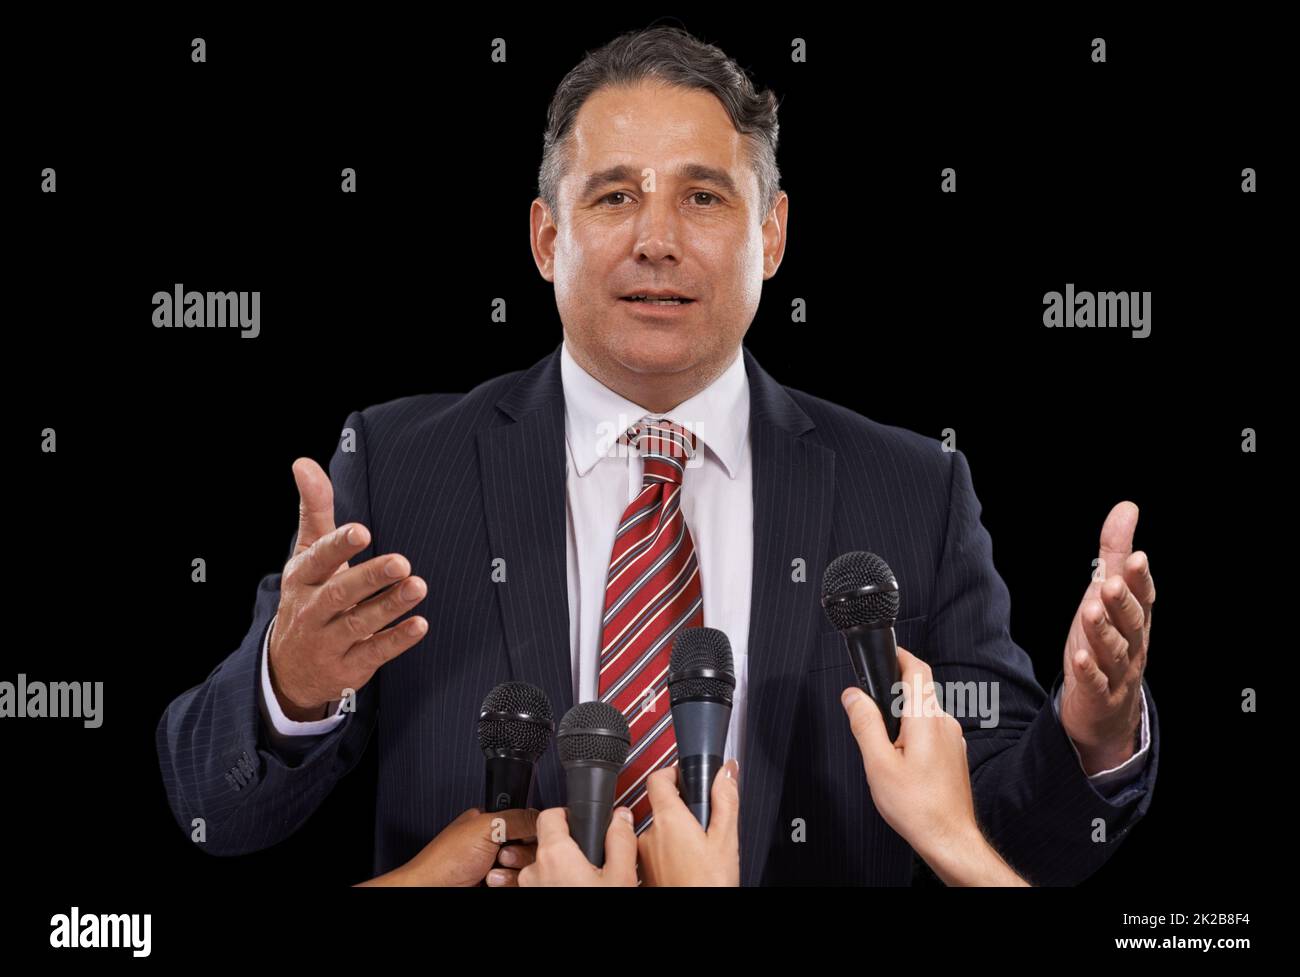 Pandering to the press. Portrait of a mature man giving a press conference on a black background. Stock Photo